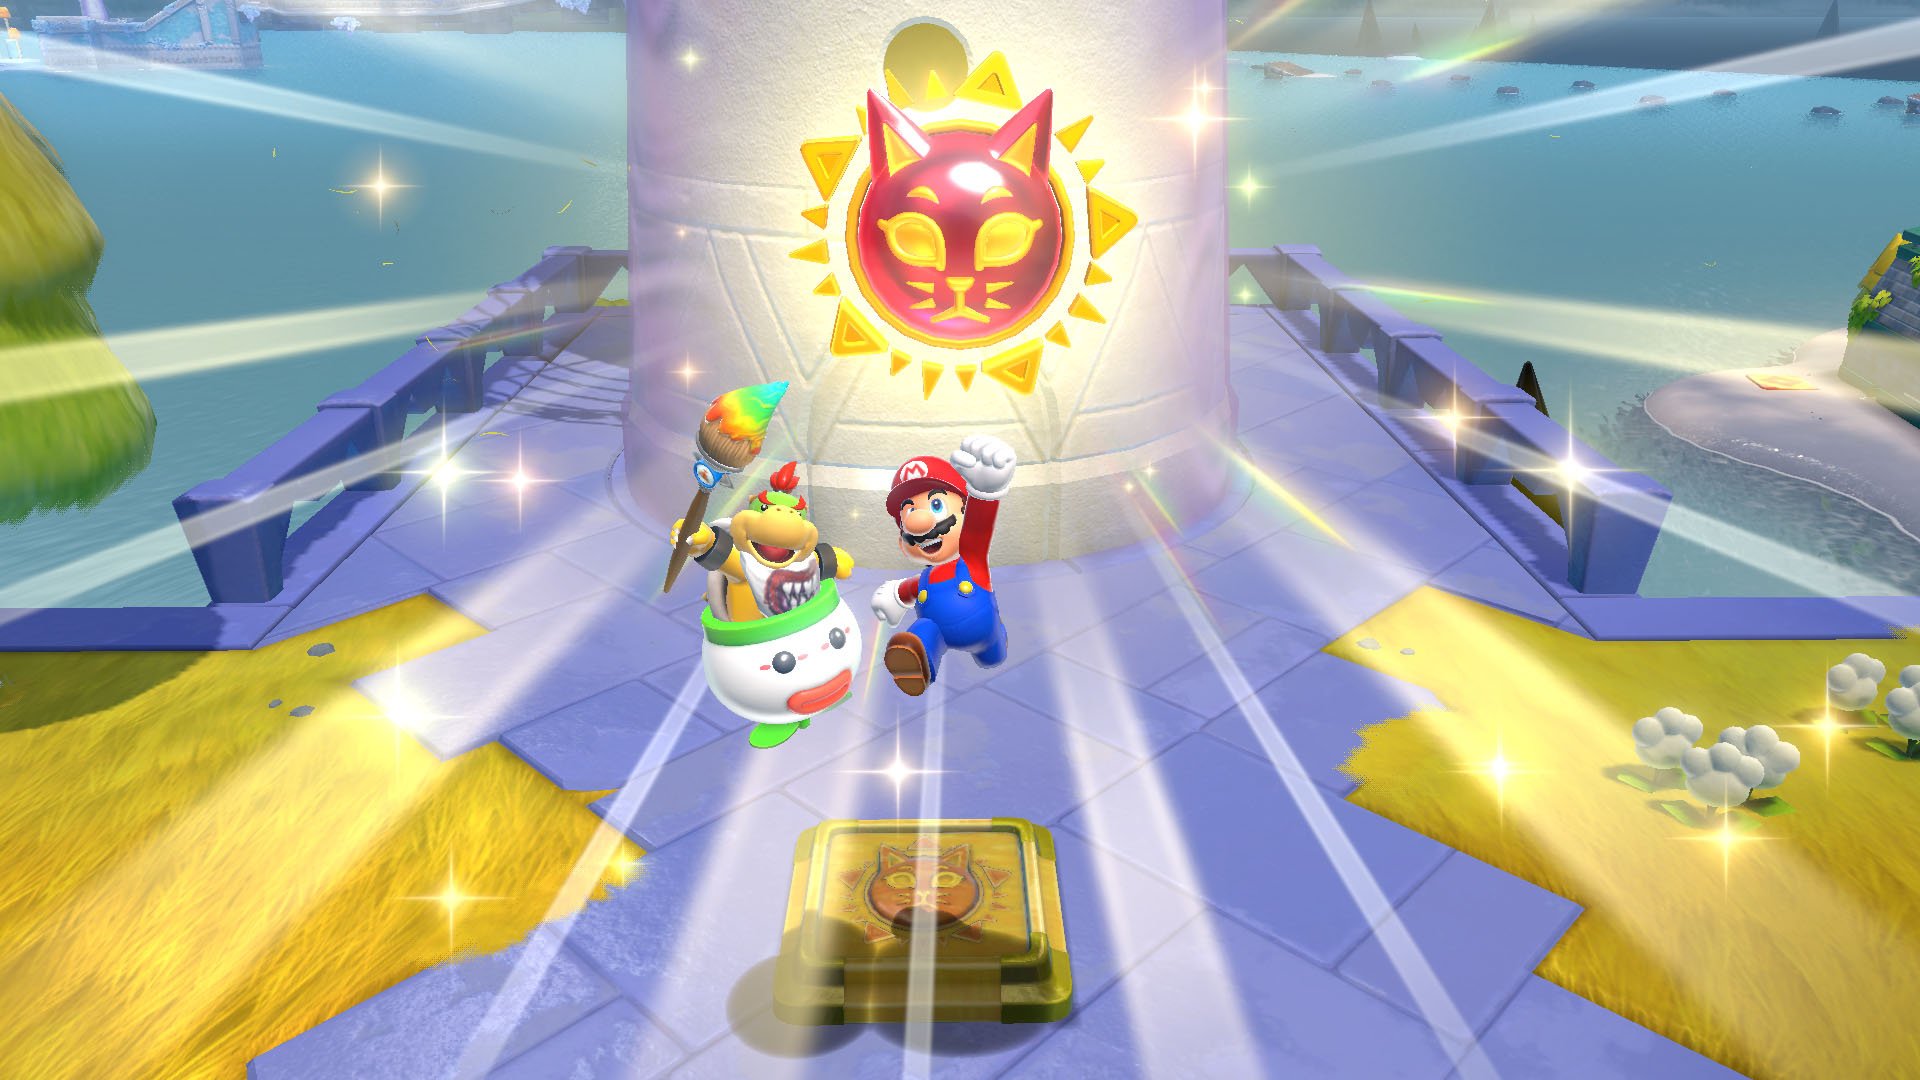 Gallery Super Mario 3d Worlds Bowsers Fury Mode Looks Stunning In 